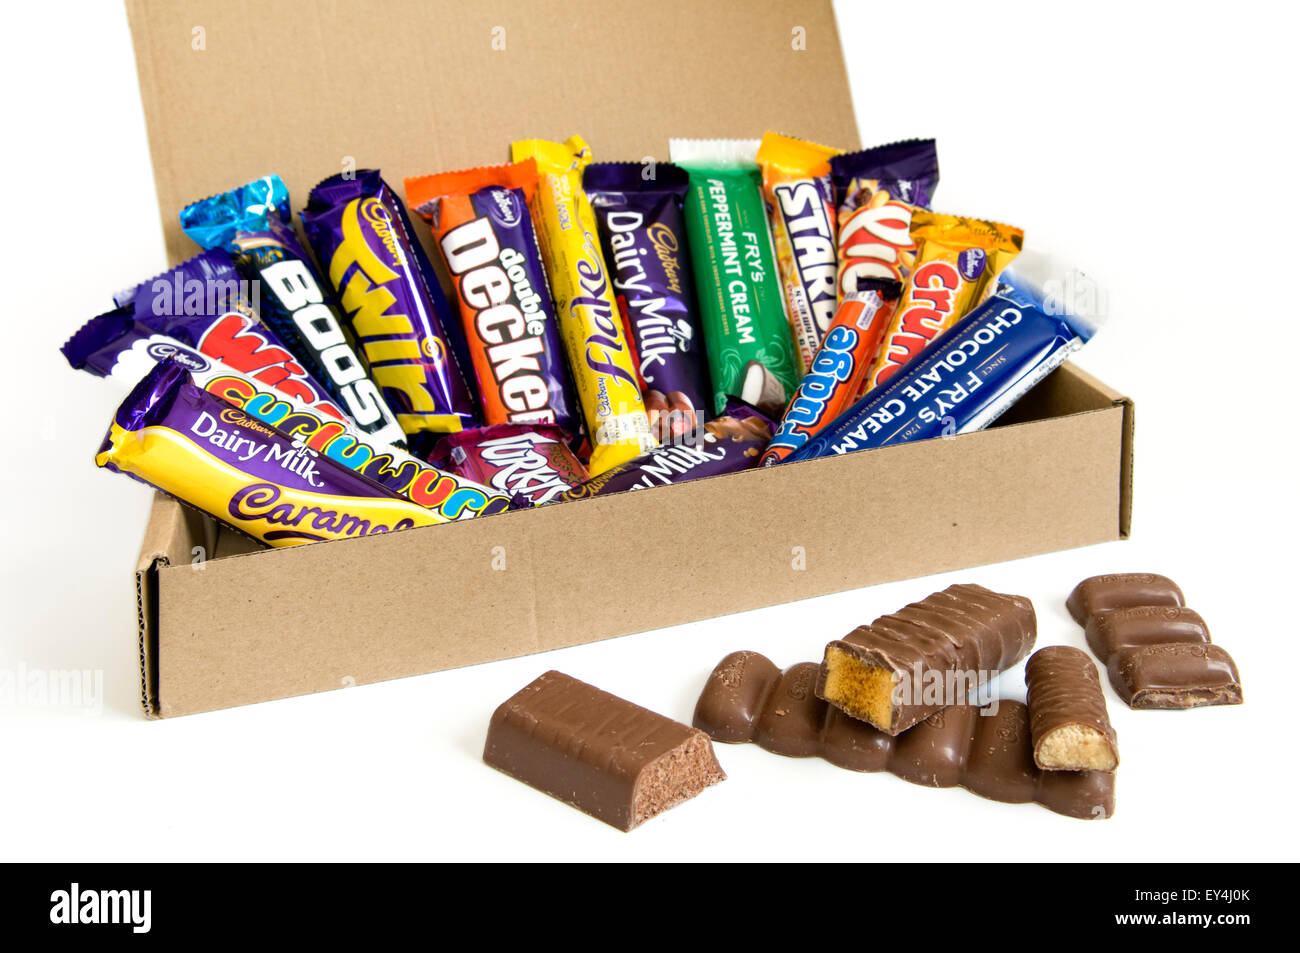 A box of Cadbury and Fry's chocolate bar selection with opened chocolate bars Stock Photo